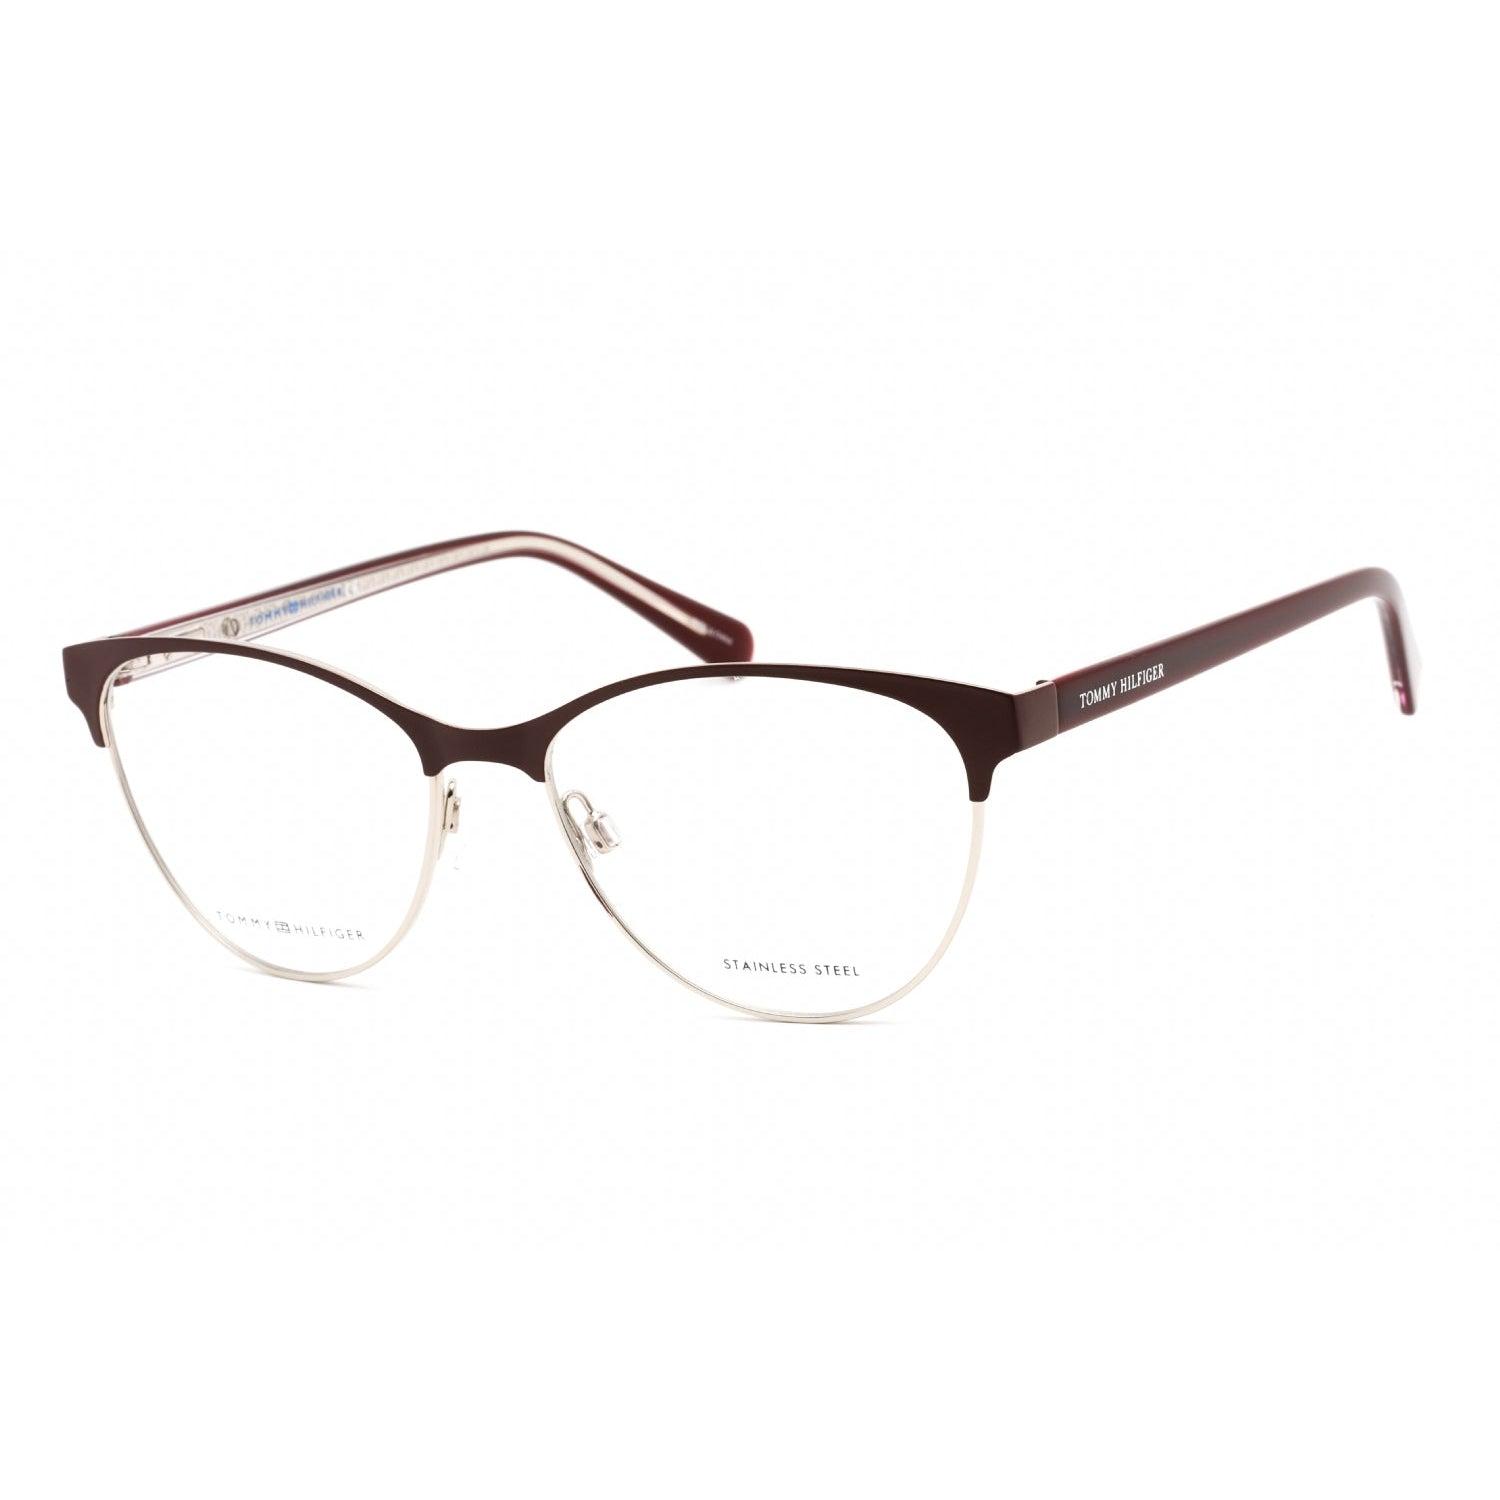 Tommy Hilfiger Th 1886 Eyeglasses Mtbrgn Pd / Clear Demo Lens in ...